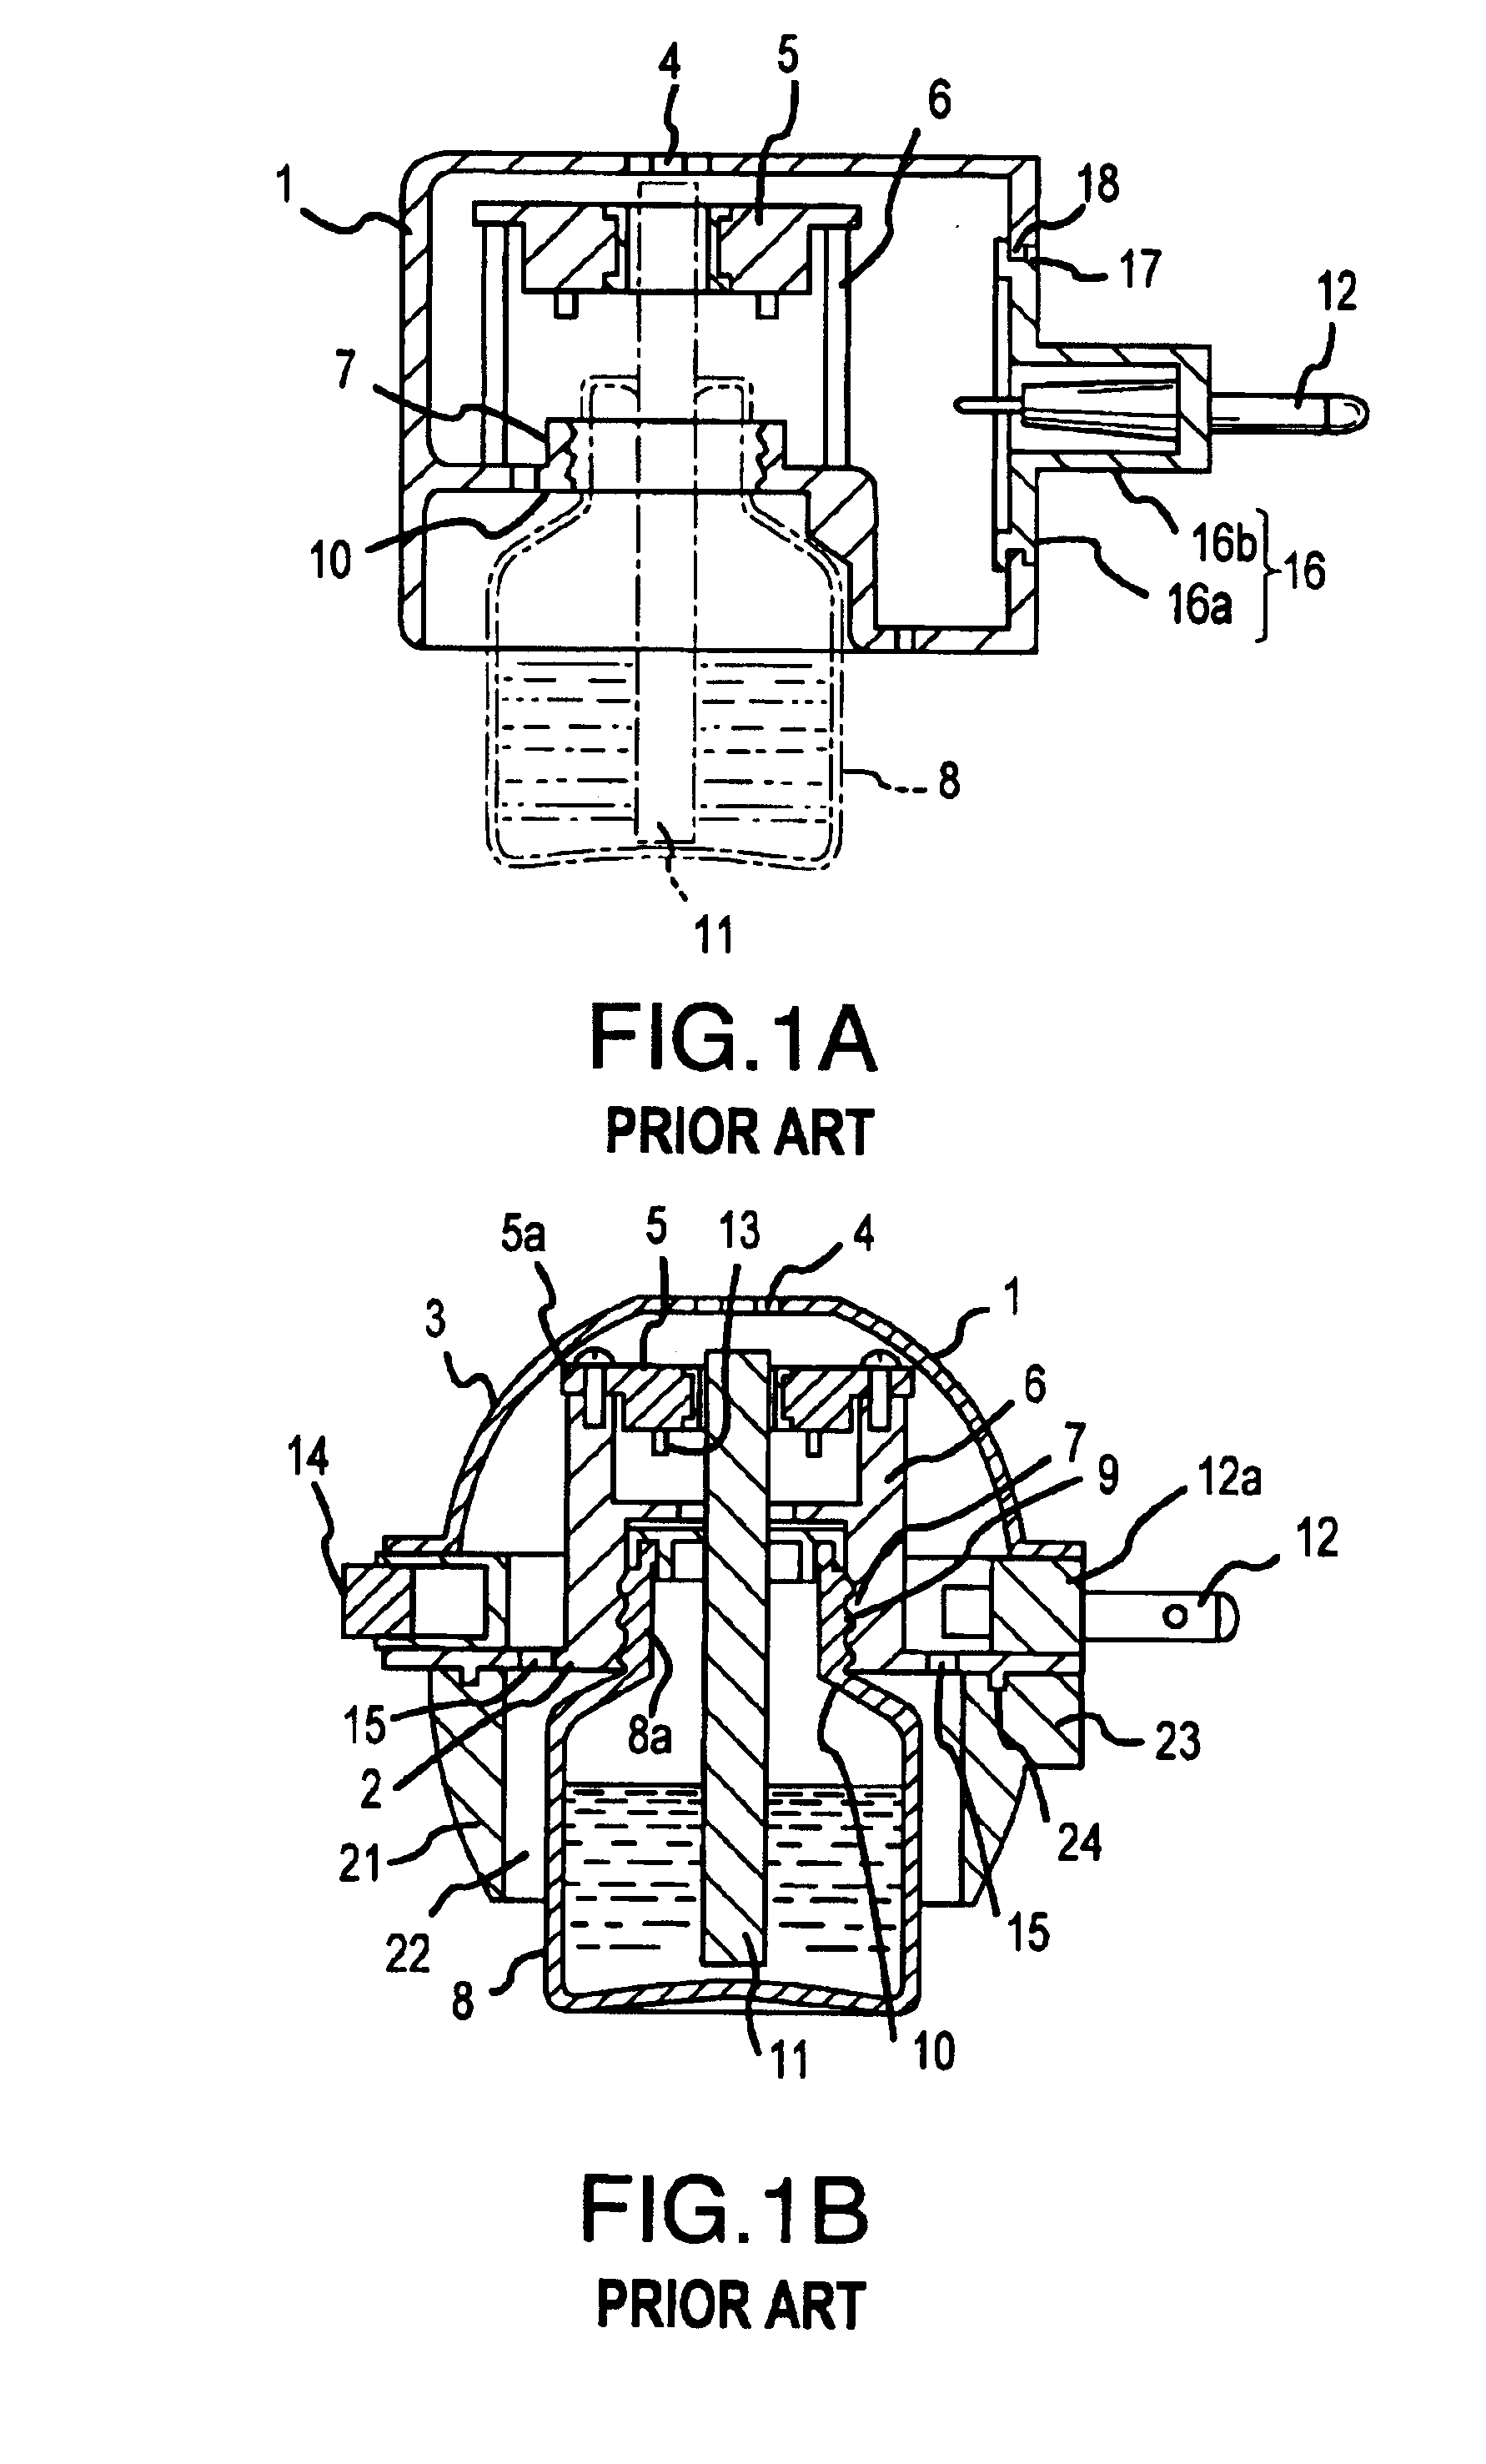 Method and apparatus for positioning a wick material in a vapor-dispensing device